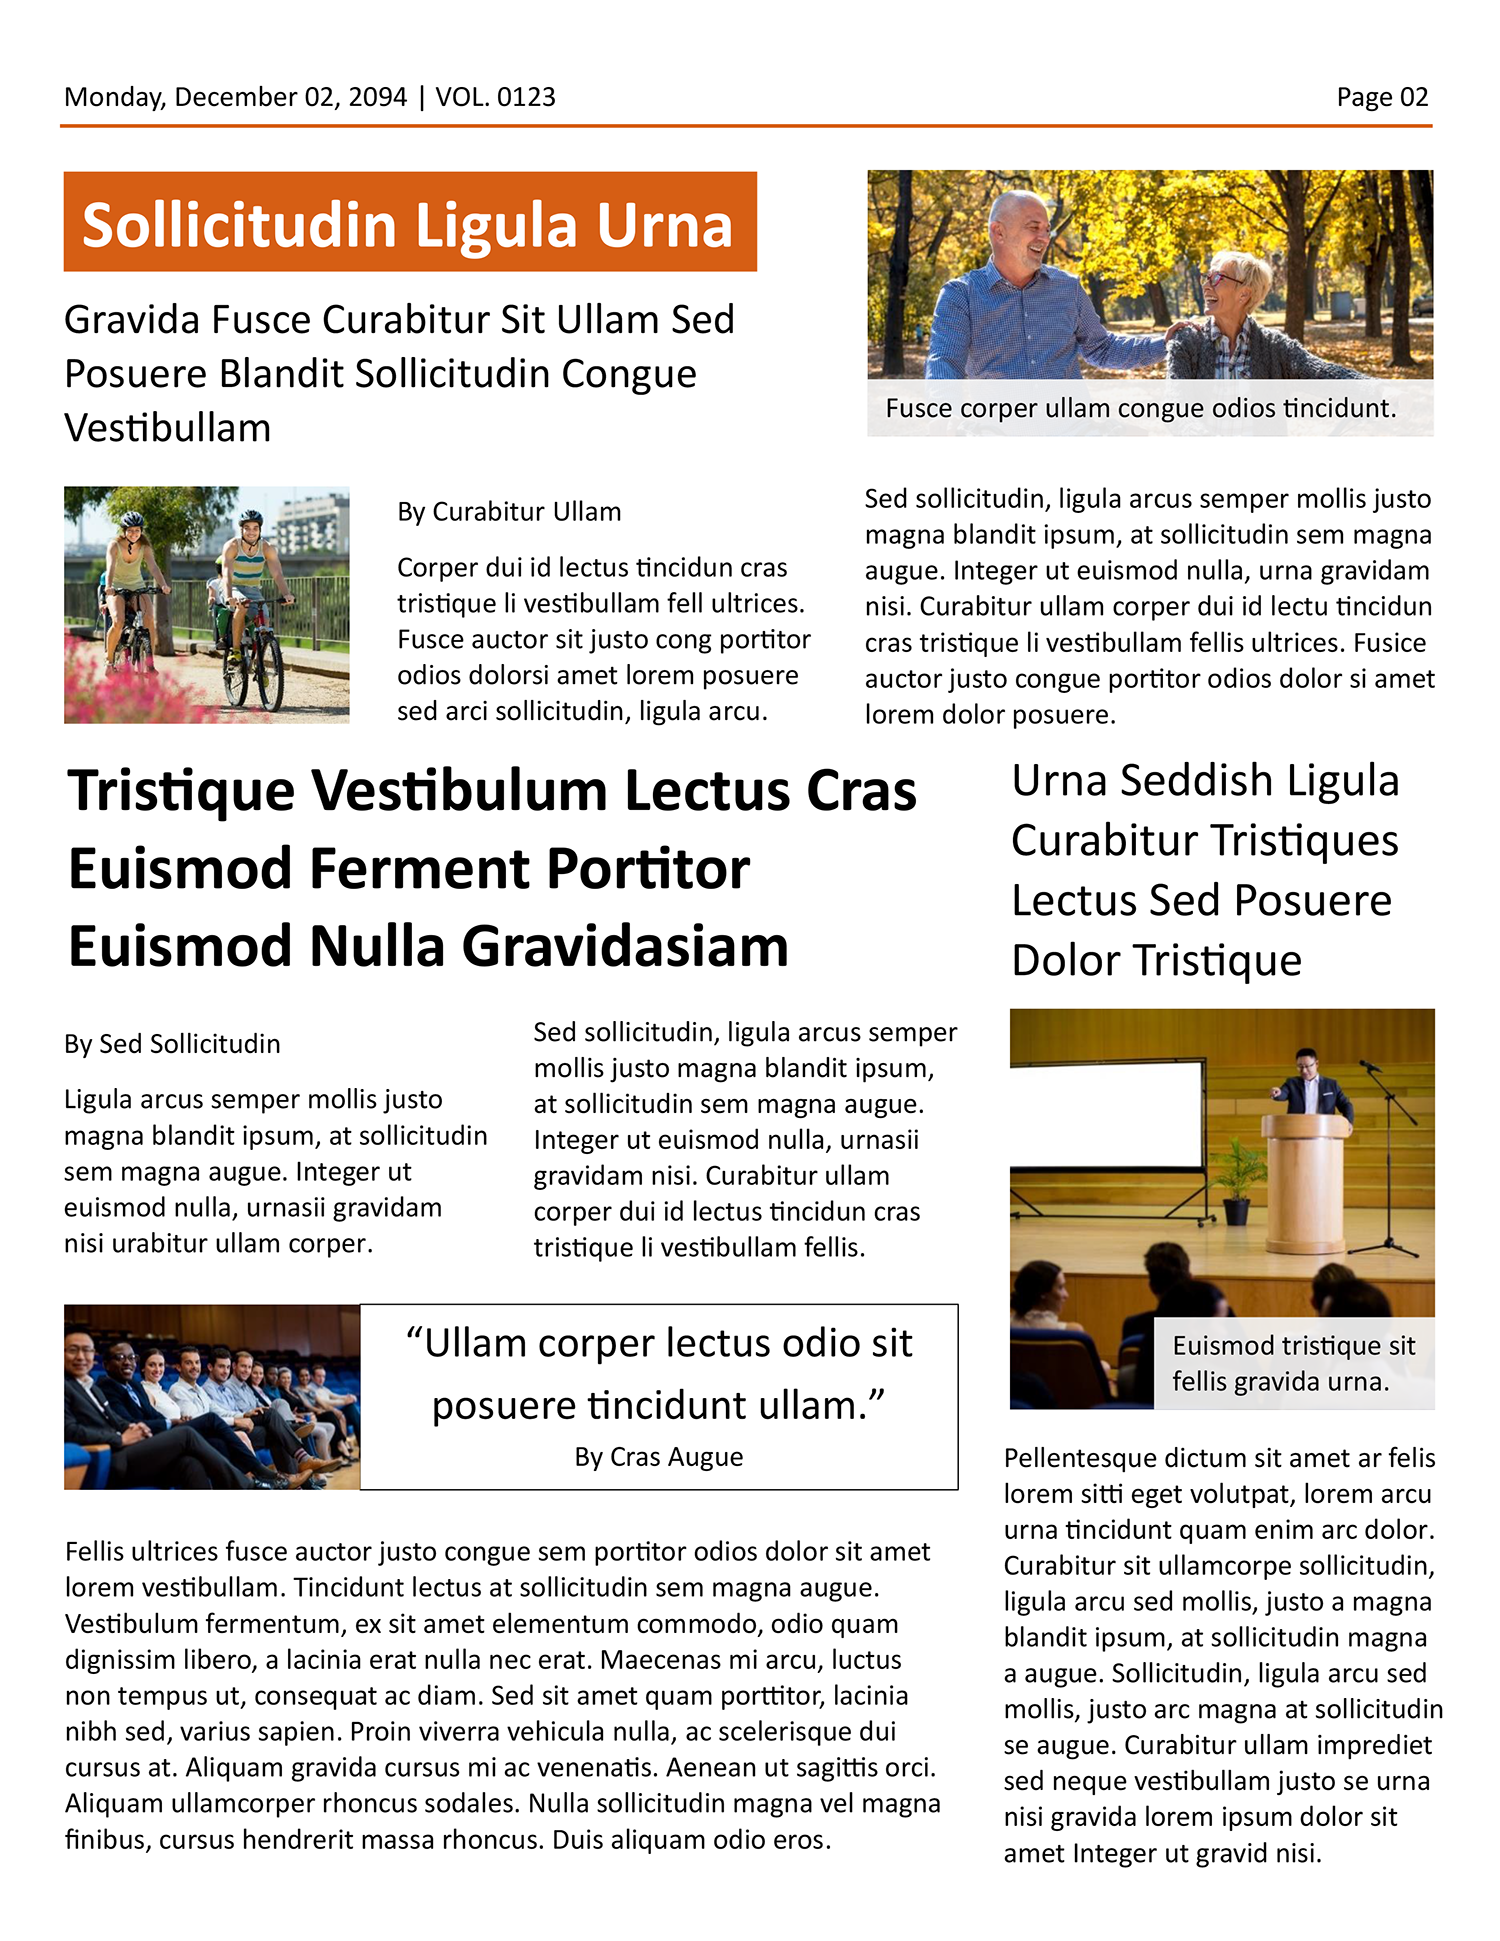 Beige and Orange Newspaper Front Page Template - Page 02